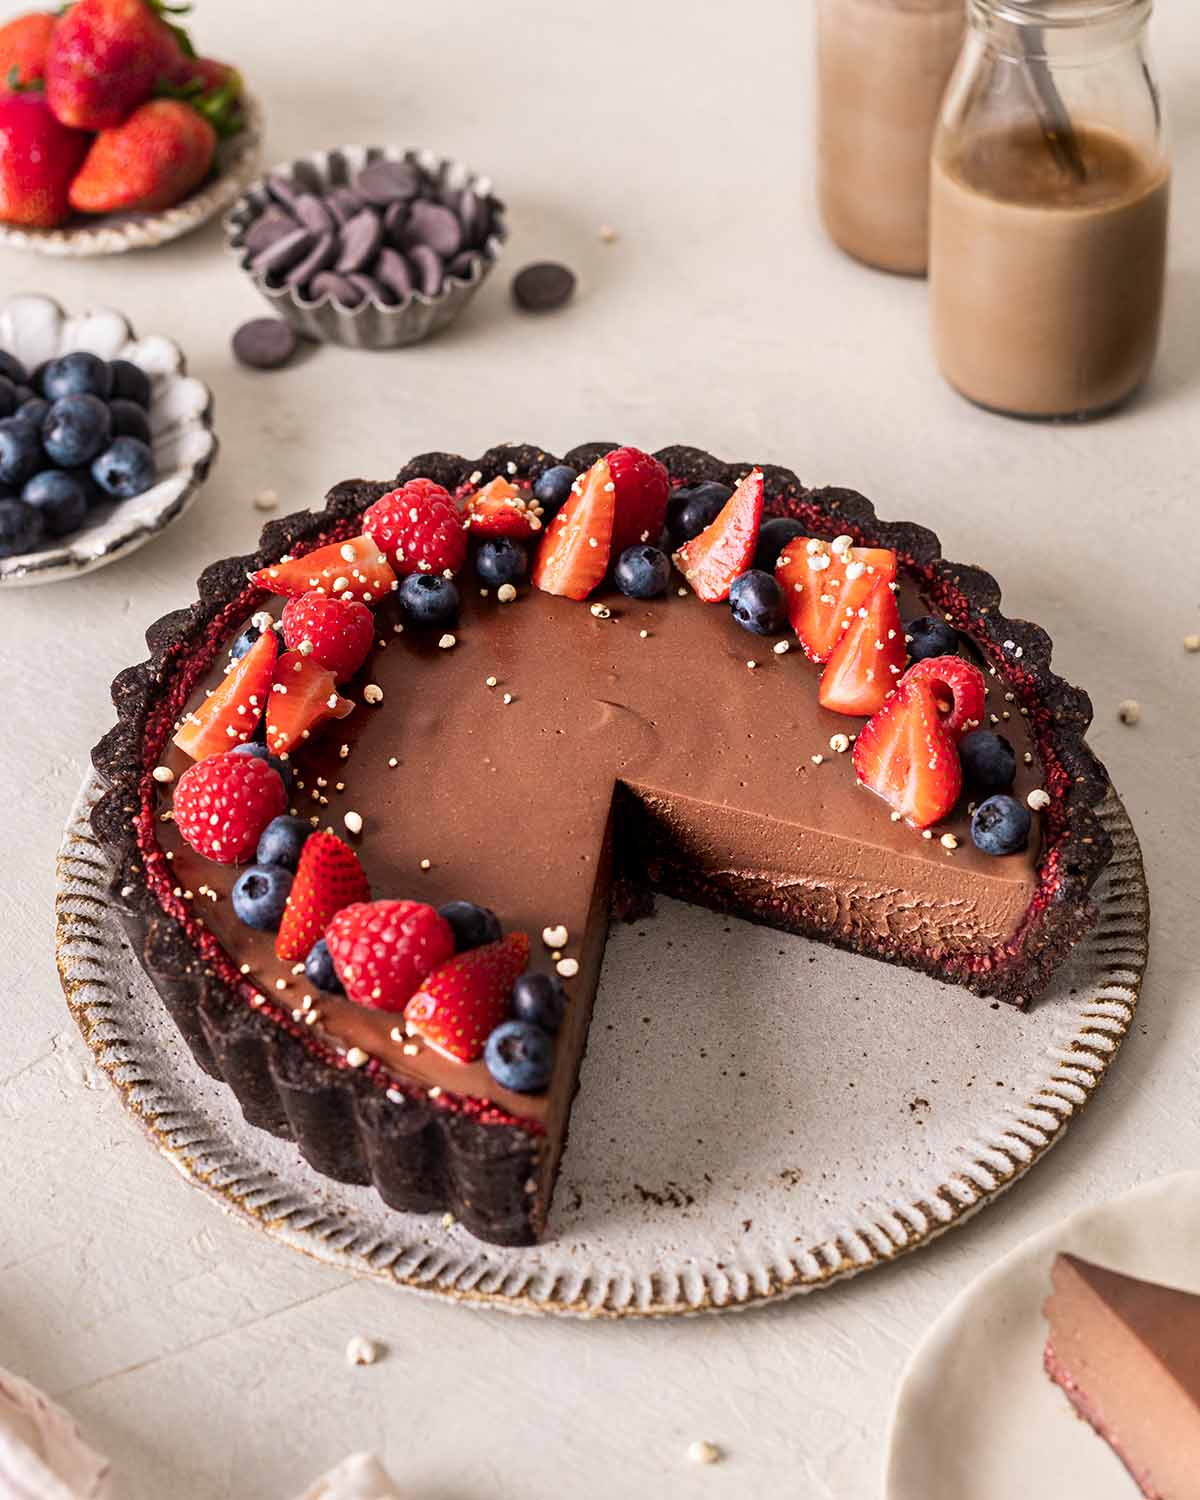 Vegan chocolate tart with berries on outer rim. Slices cut out of tart showing mousse-like texture.